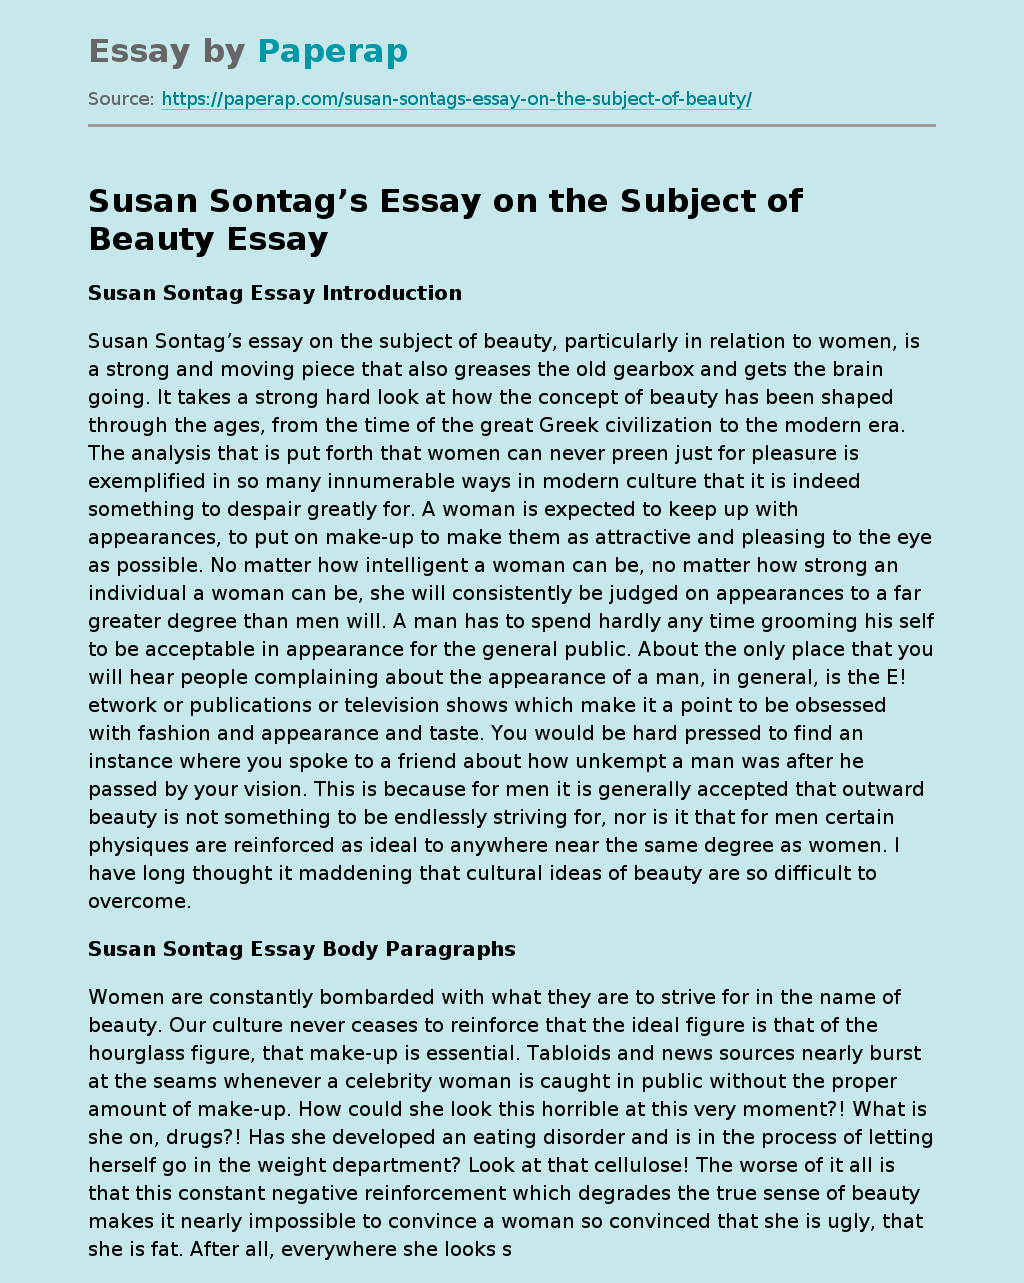 Susan Sontag’s Essay on the Subject of Beauty